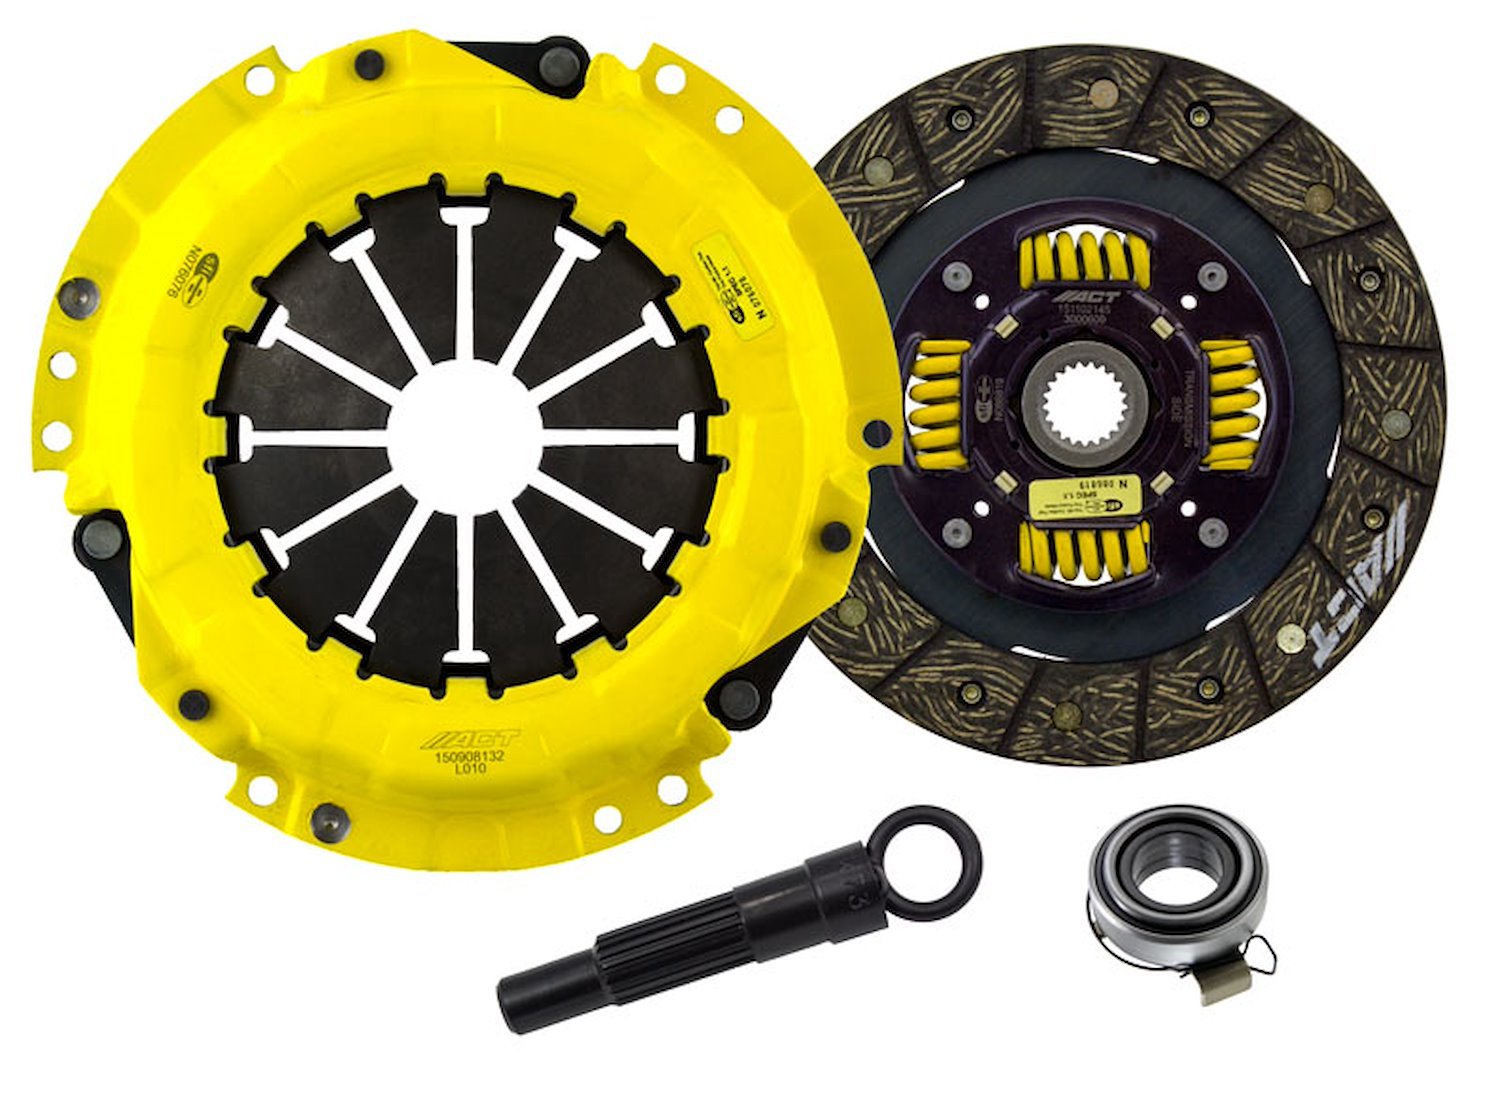 HD/Performance Street Sprung Transmission Clutch Kit Fits Select Lotus